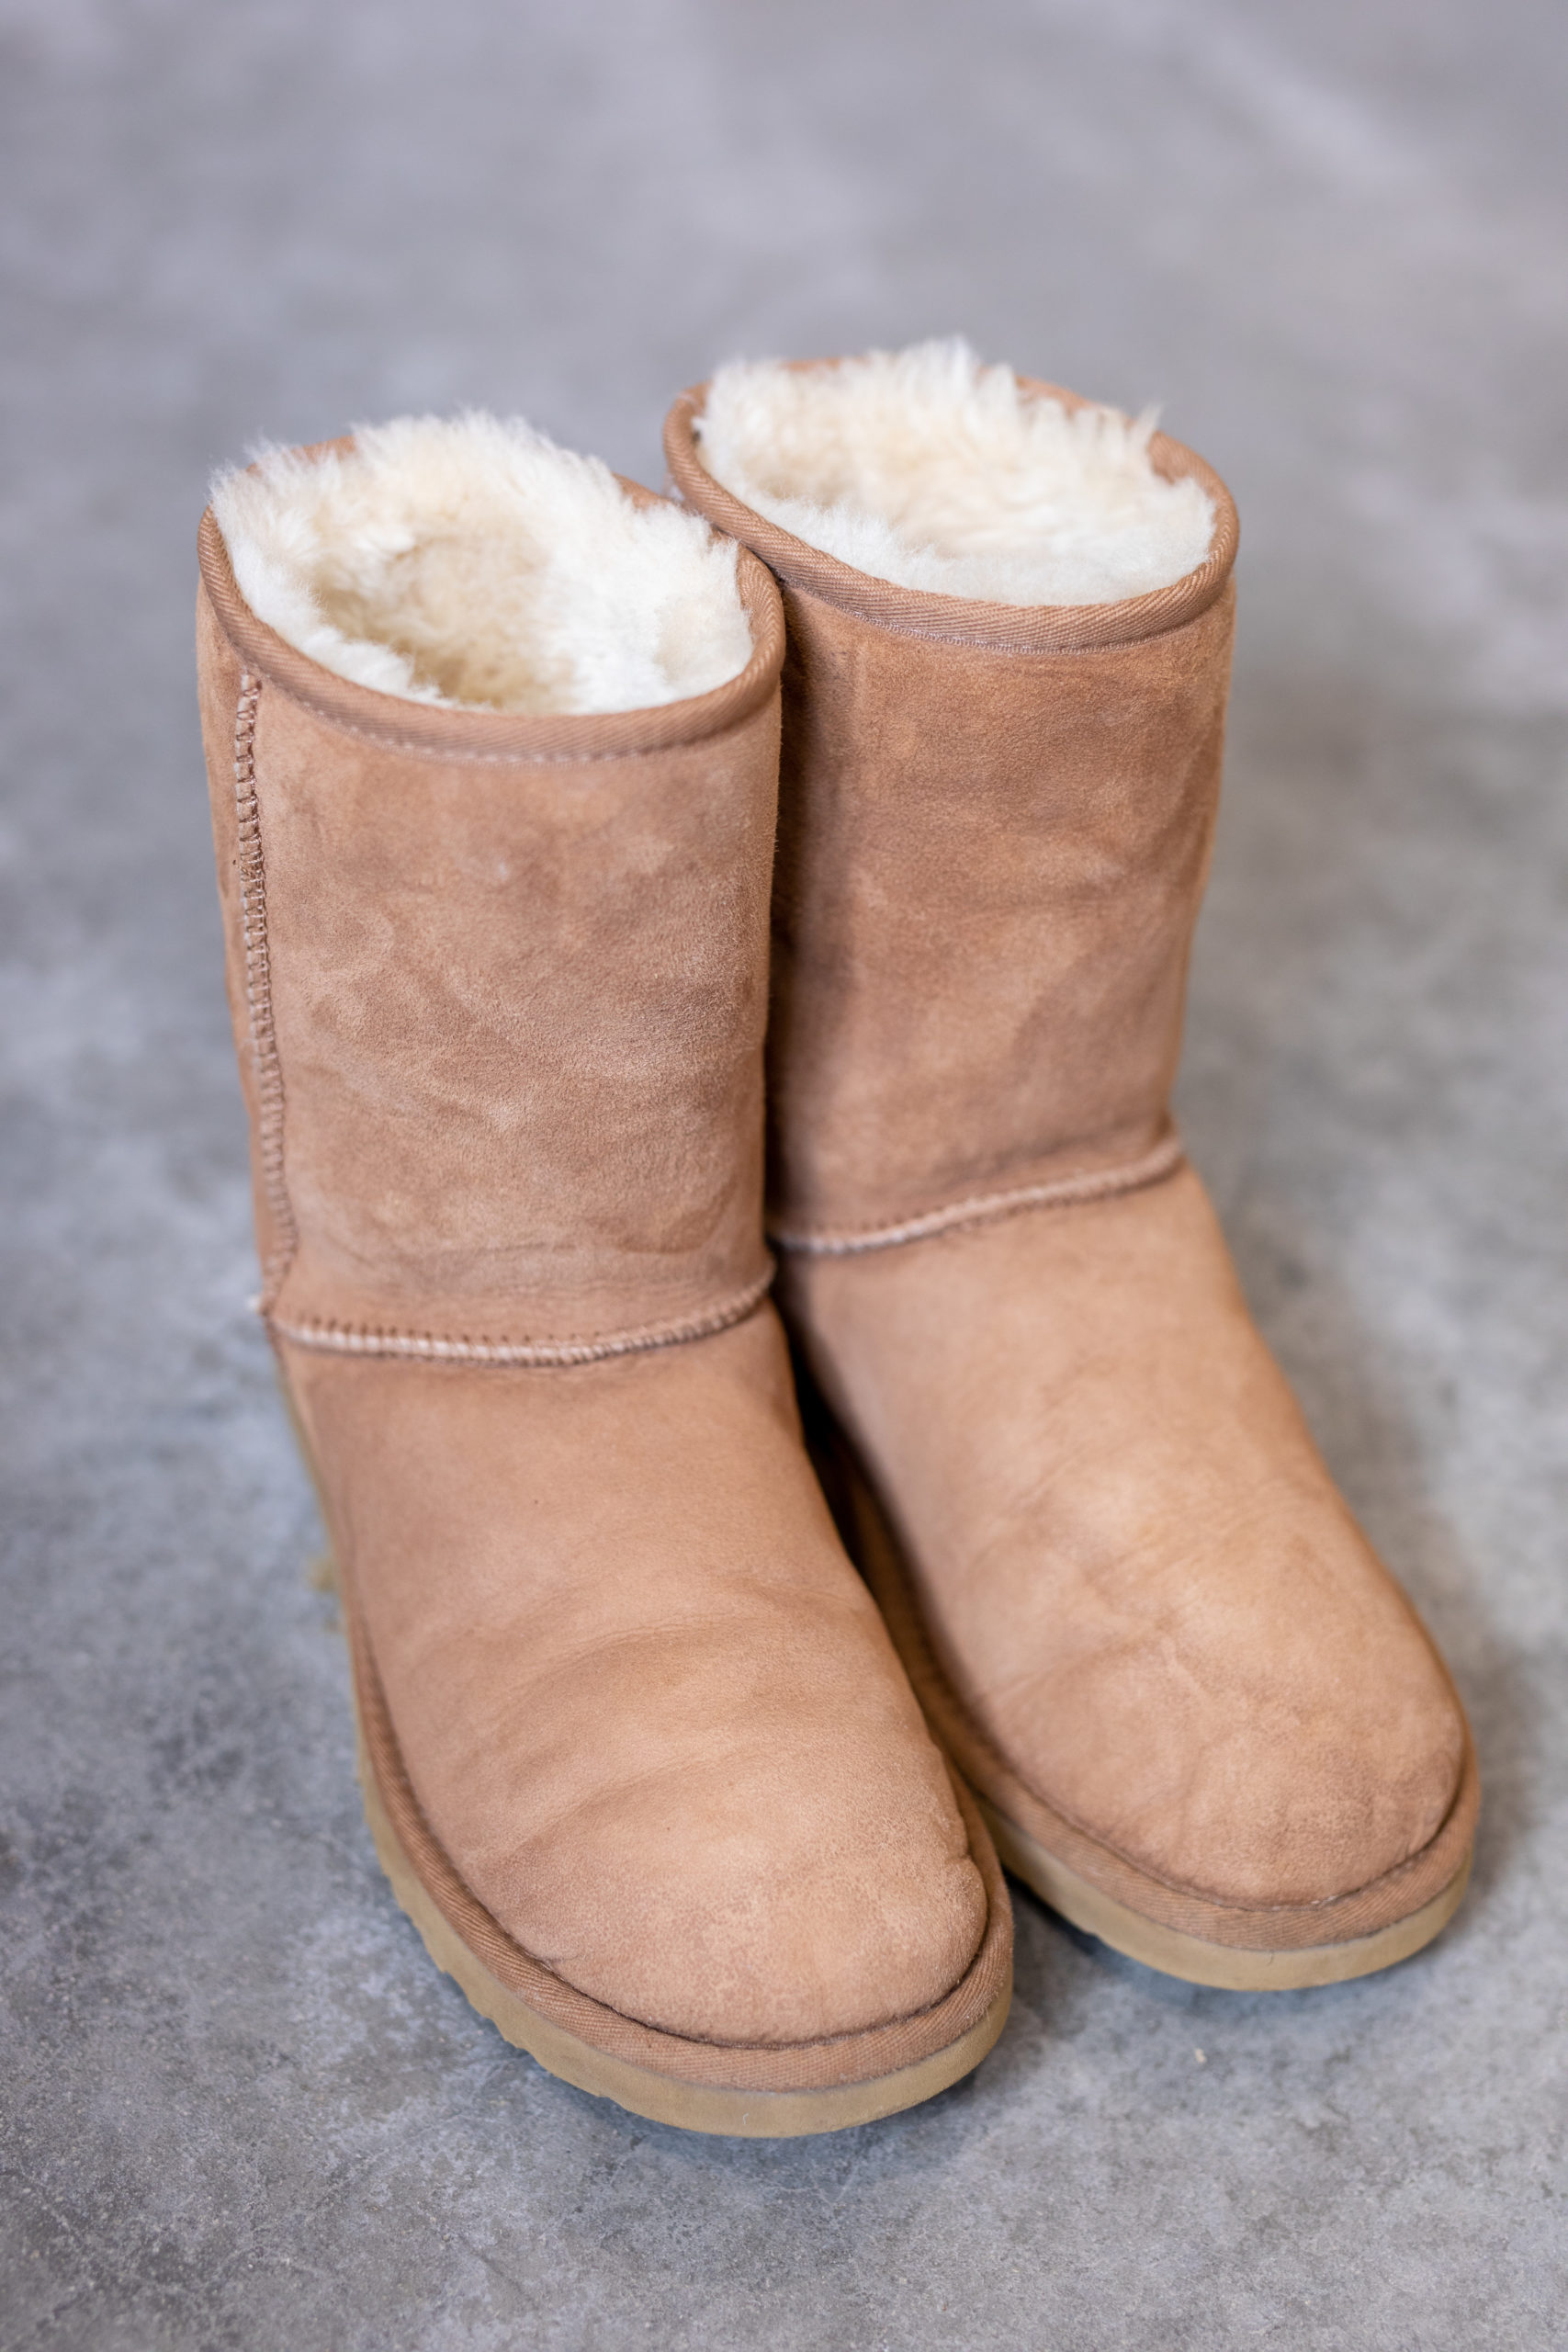 how to clean ugg sandals